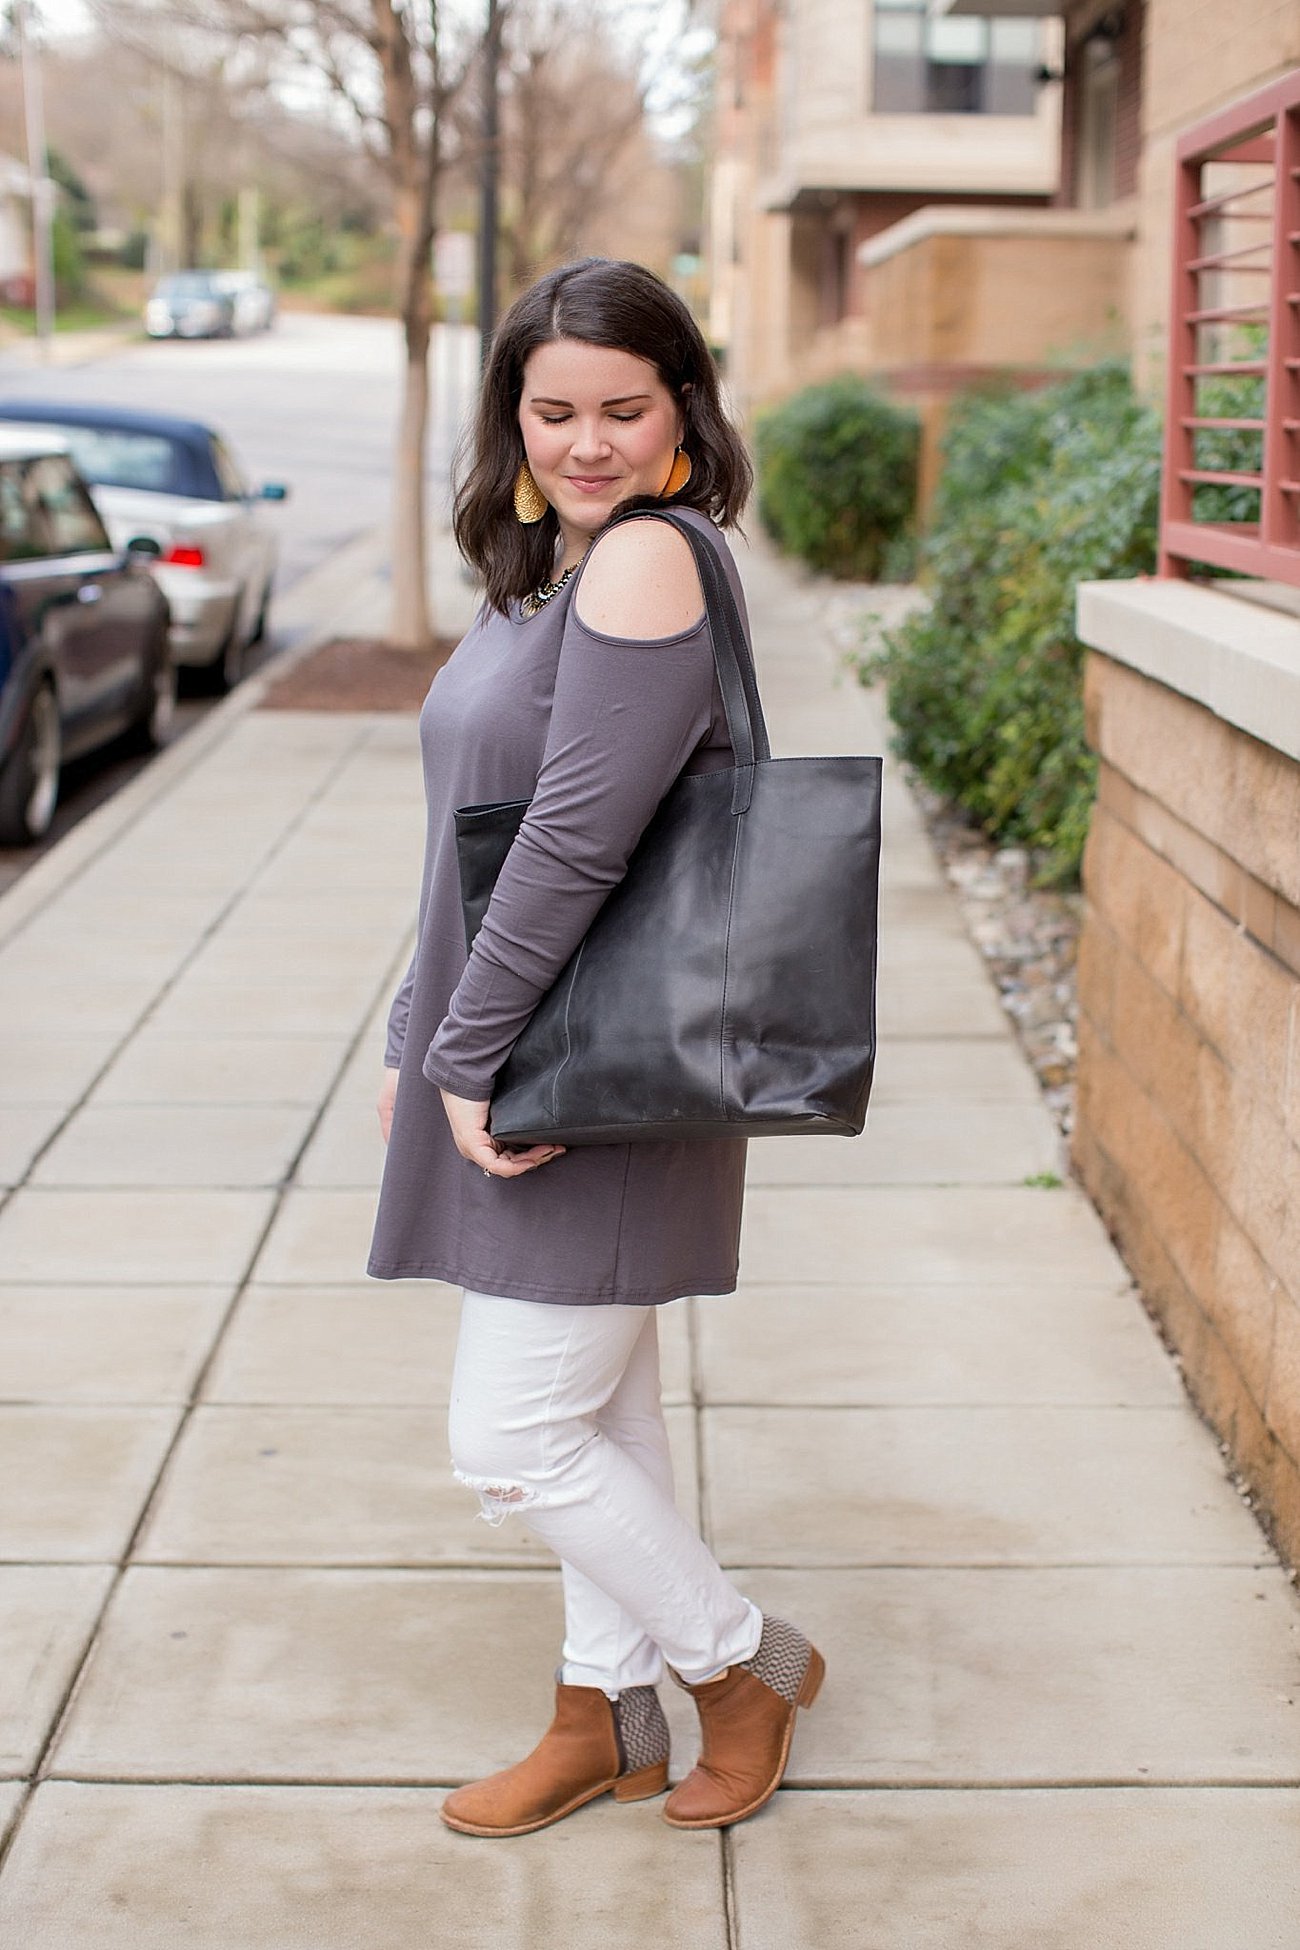 Elegantees cold shoulder tunic, The Flourish Market, Sseko Designs "florence" necklace, The Root Collective booties (7)